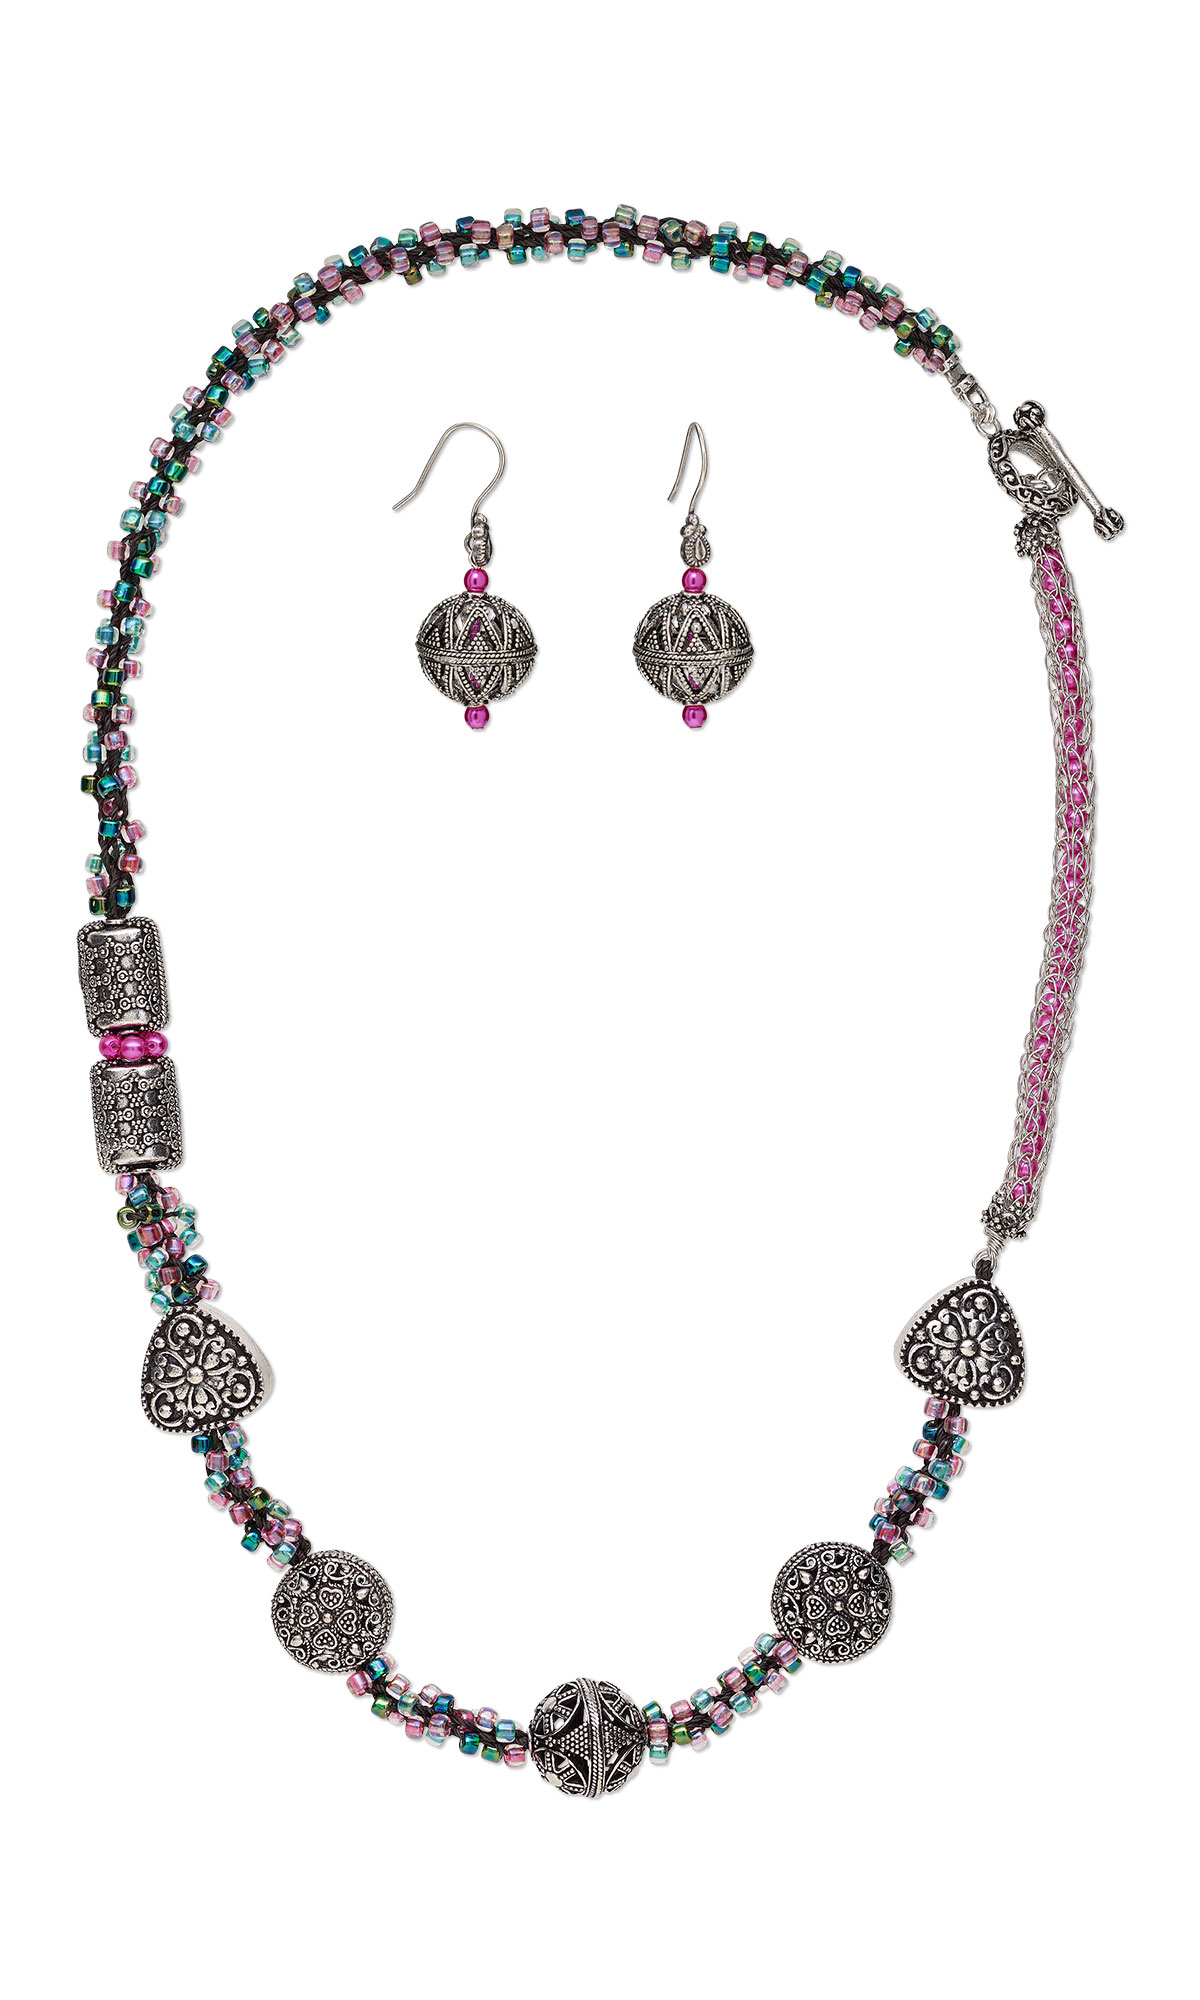 Jewelry Design - Single-Strand Necklace and Earring Set with Antiqued ...